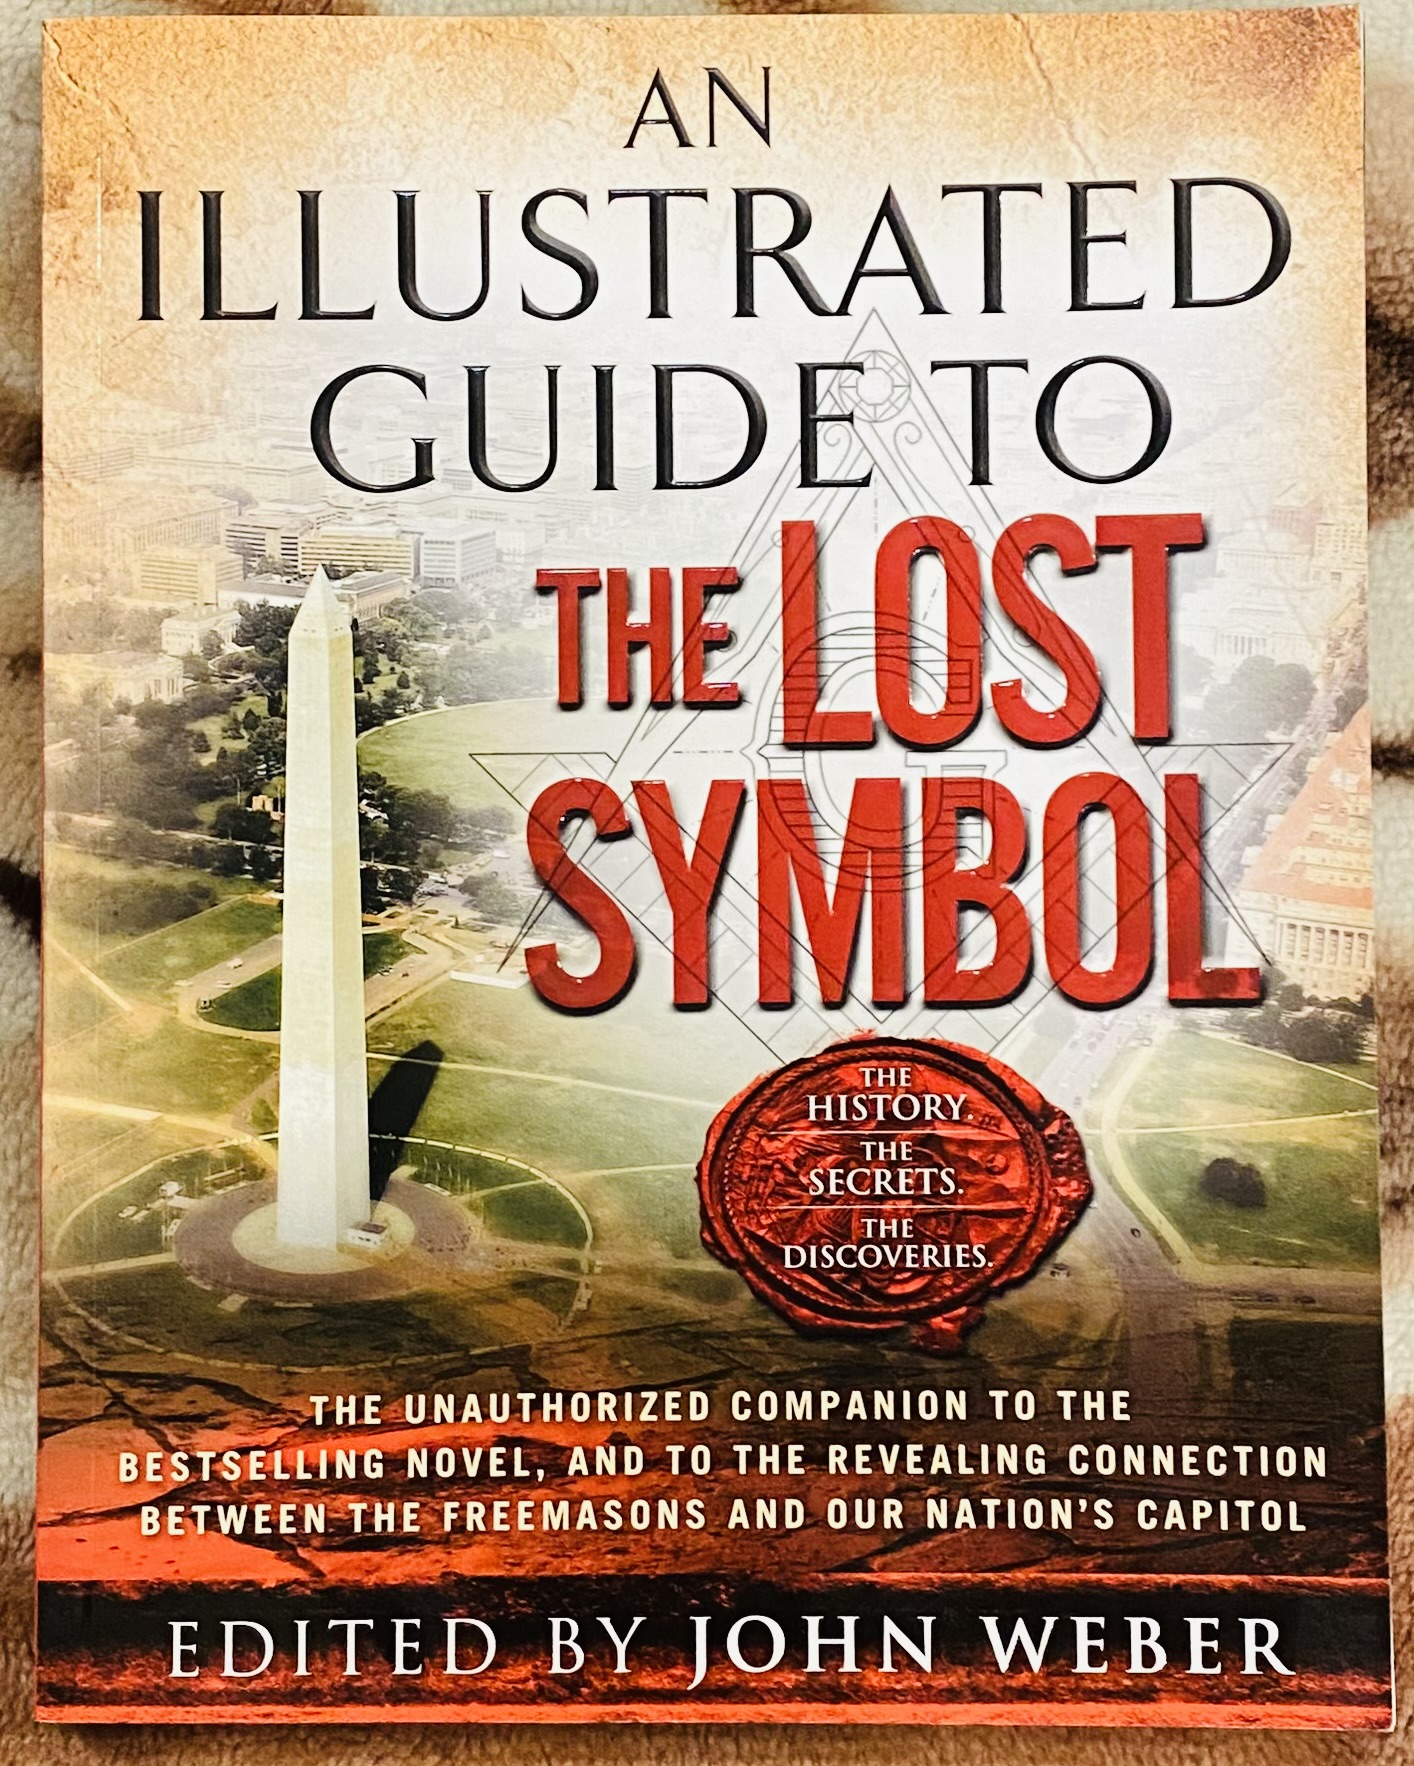 An illustrated guide to the lost symbol